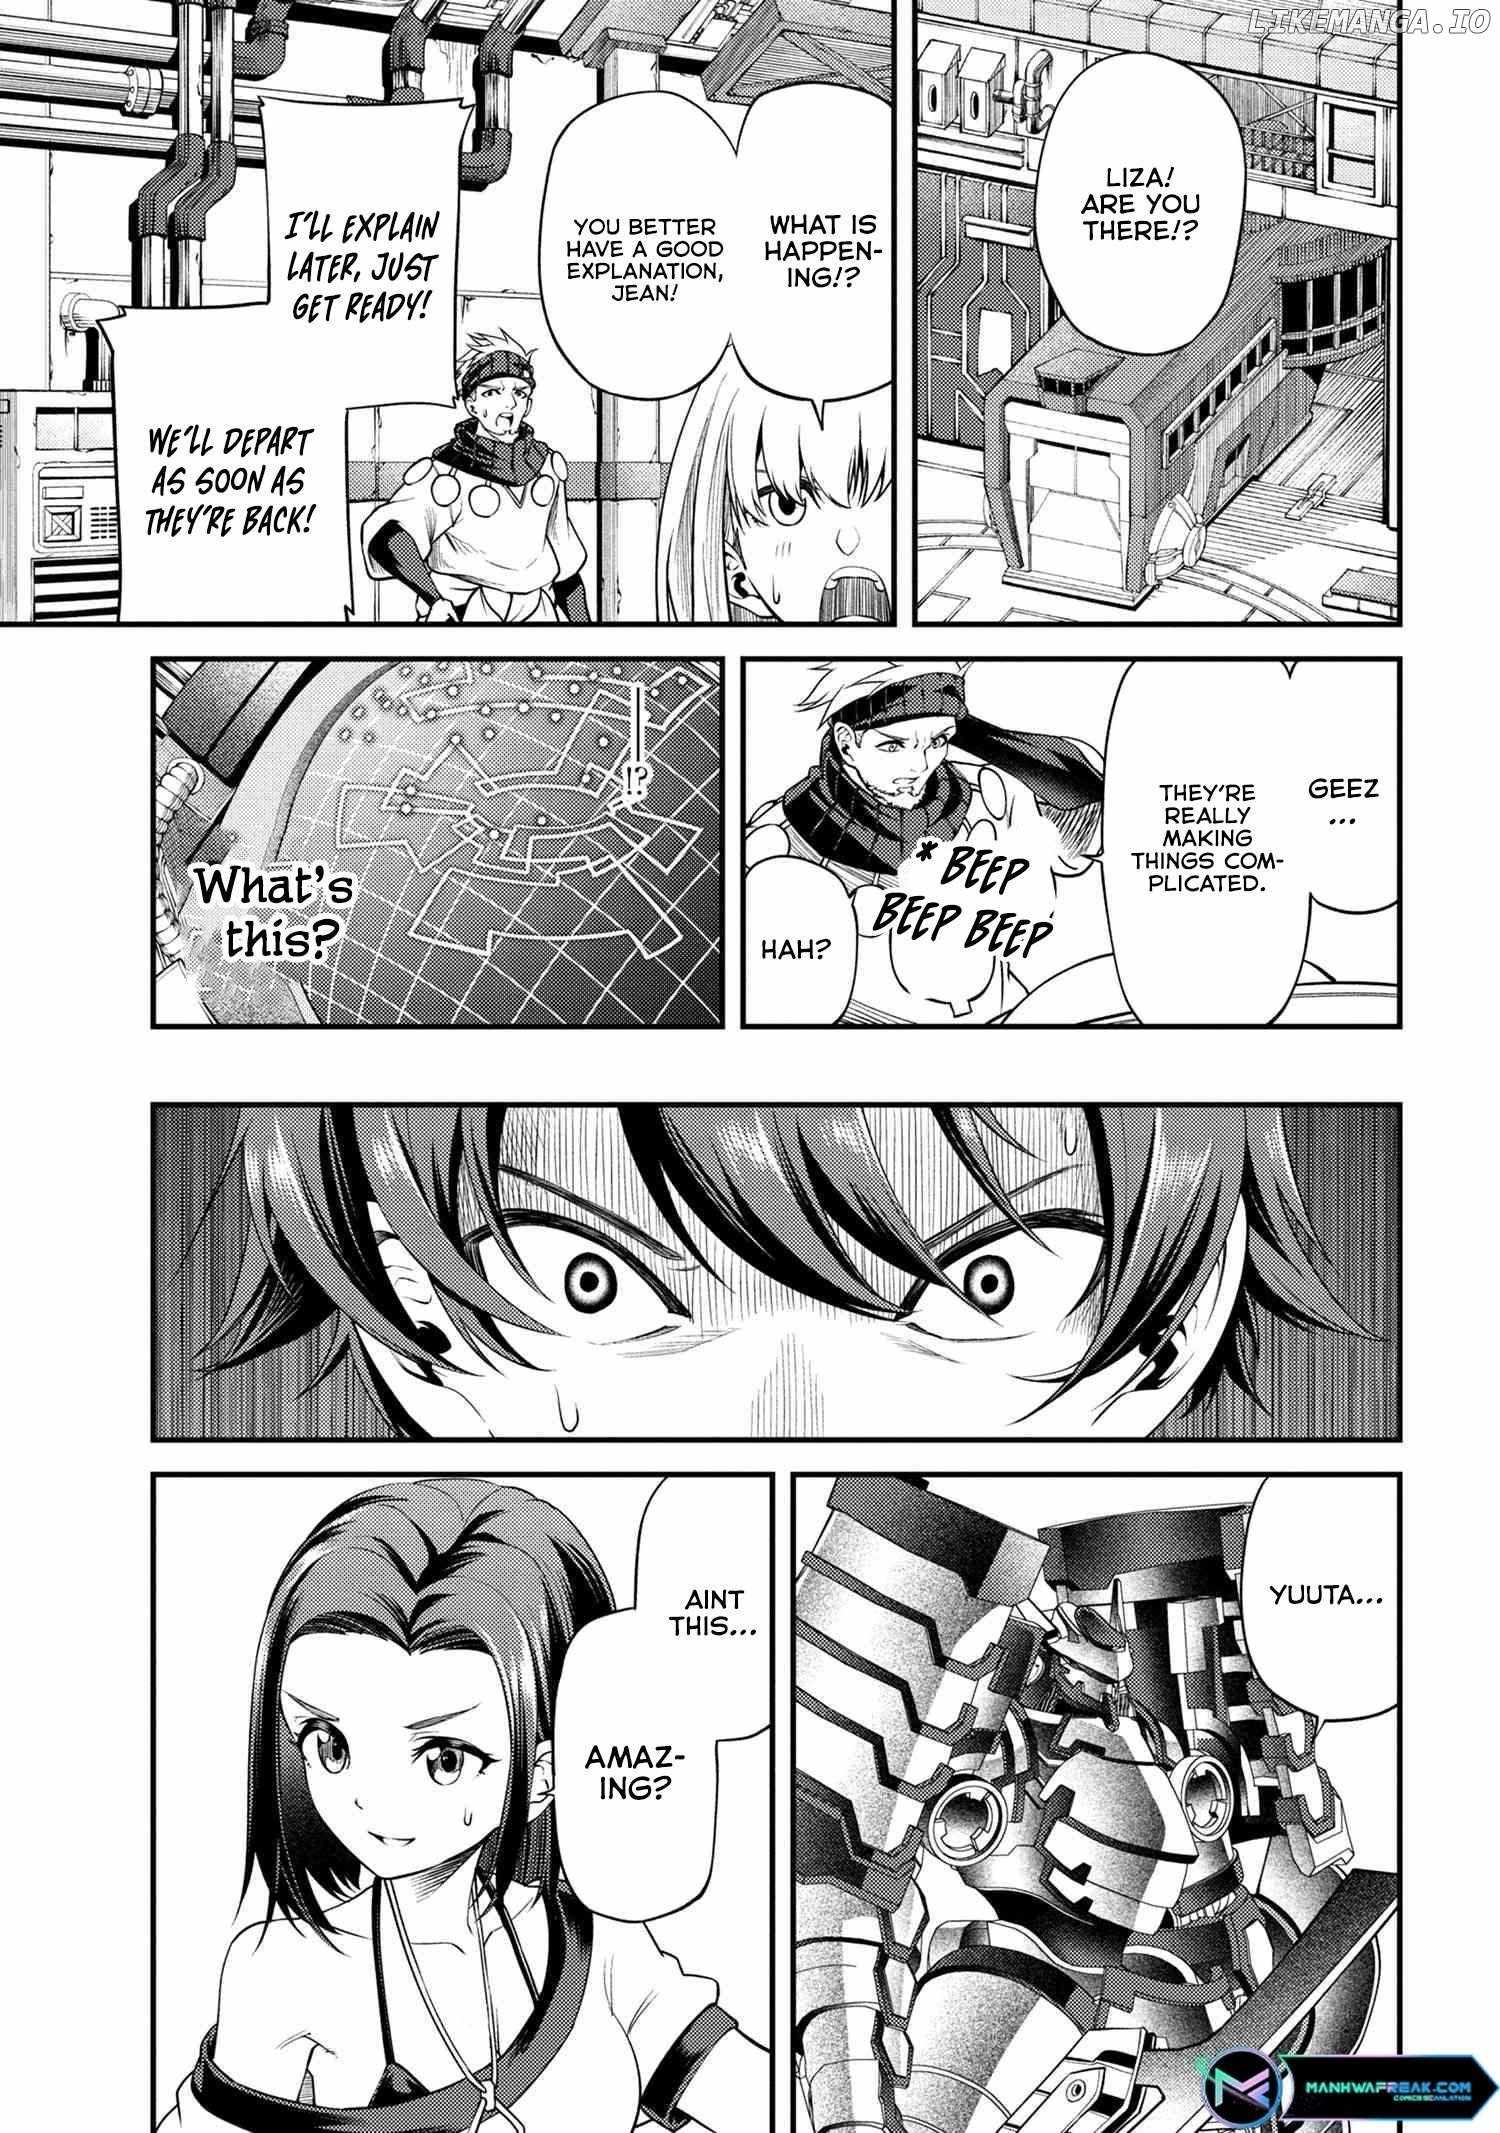 read I WAS SOLD AT THE LOWEST PRICE IN MY CLASS, HOWEVER MY PERSONAL PARAMETER IS THE MOST POWERFUL Chapter 20-2 Manga Online Free at Mangabuddy, MangaNato,Manhwatop | MangaSo.com